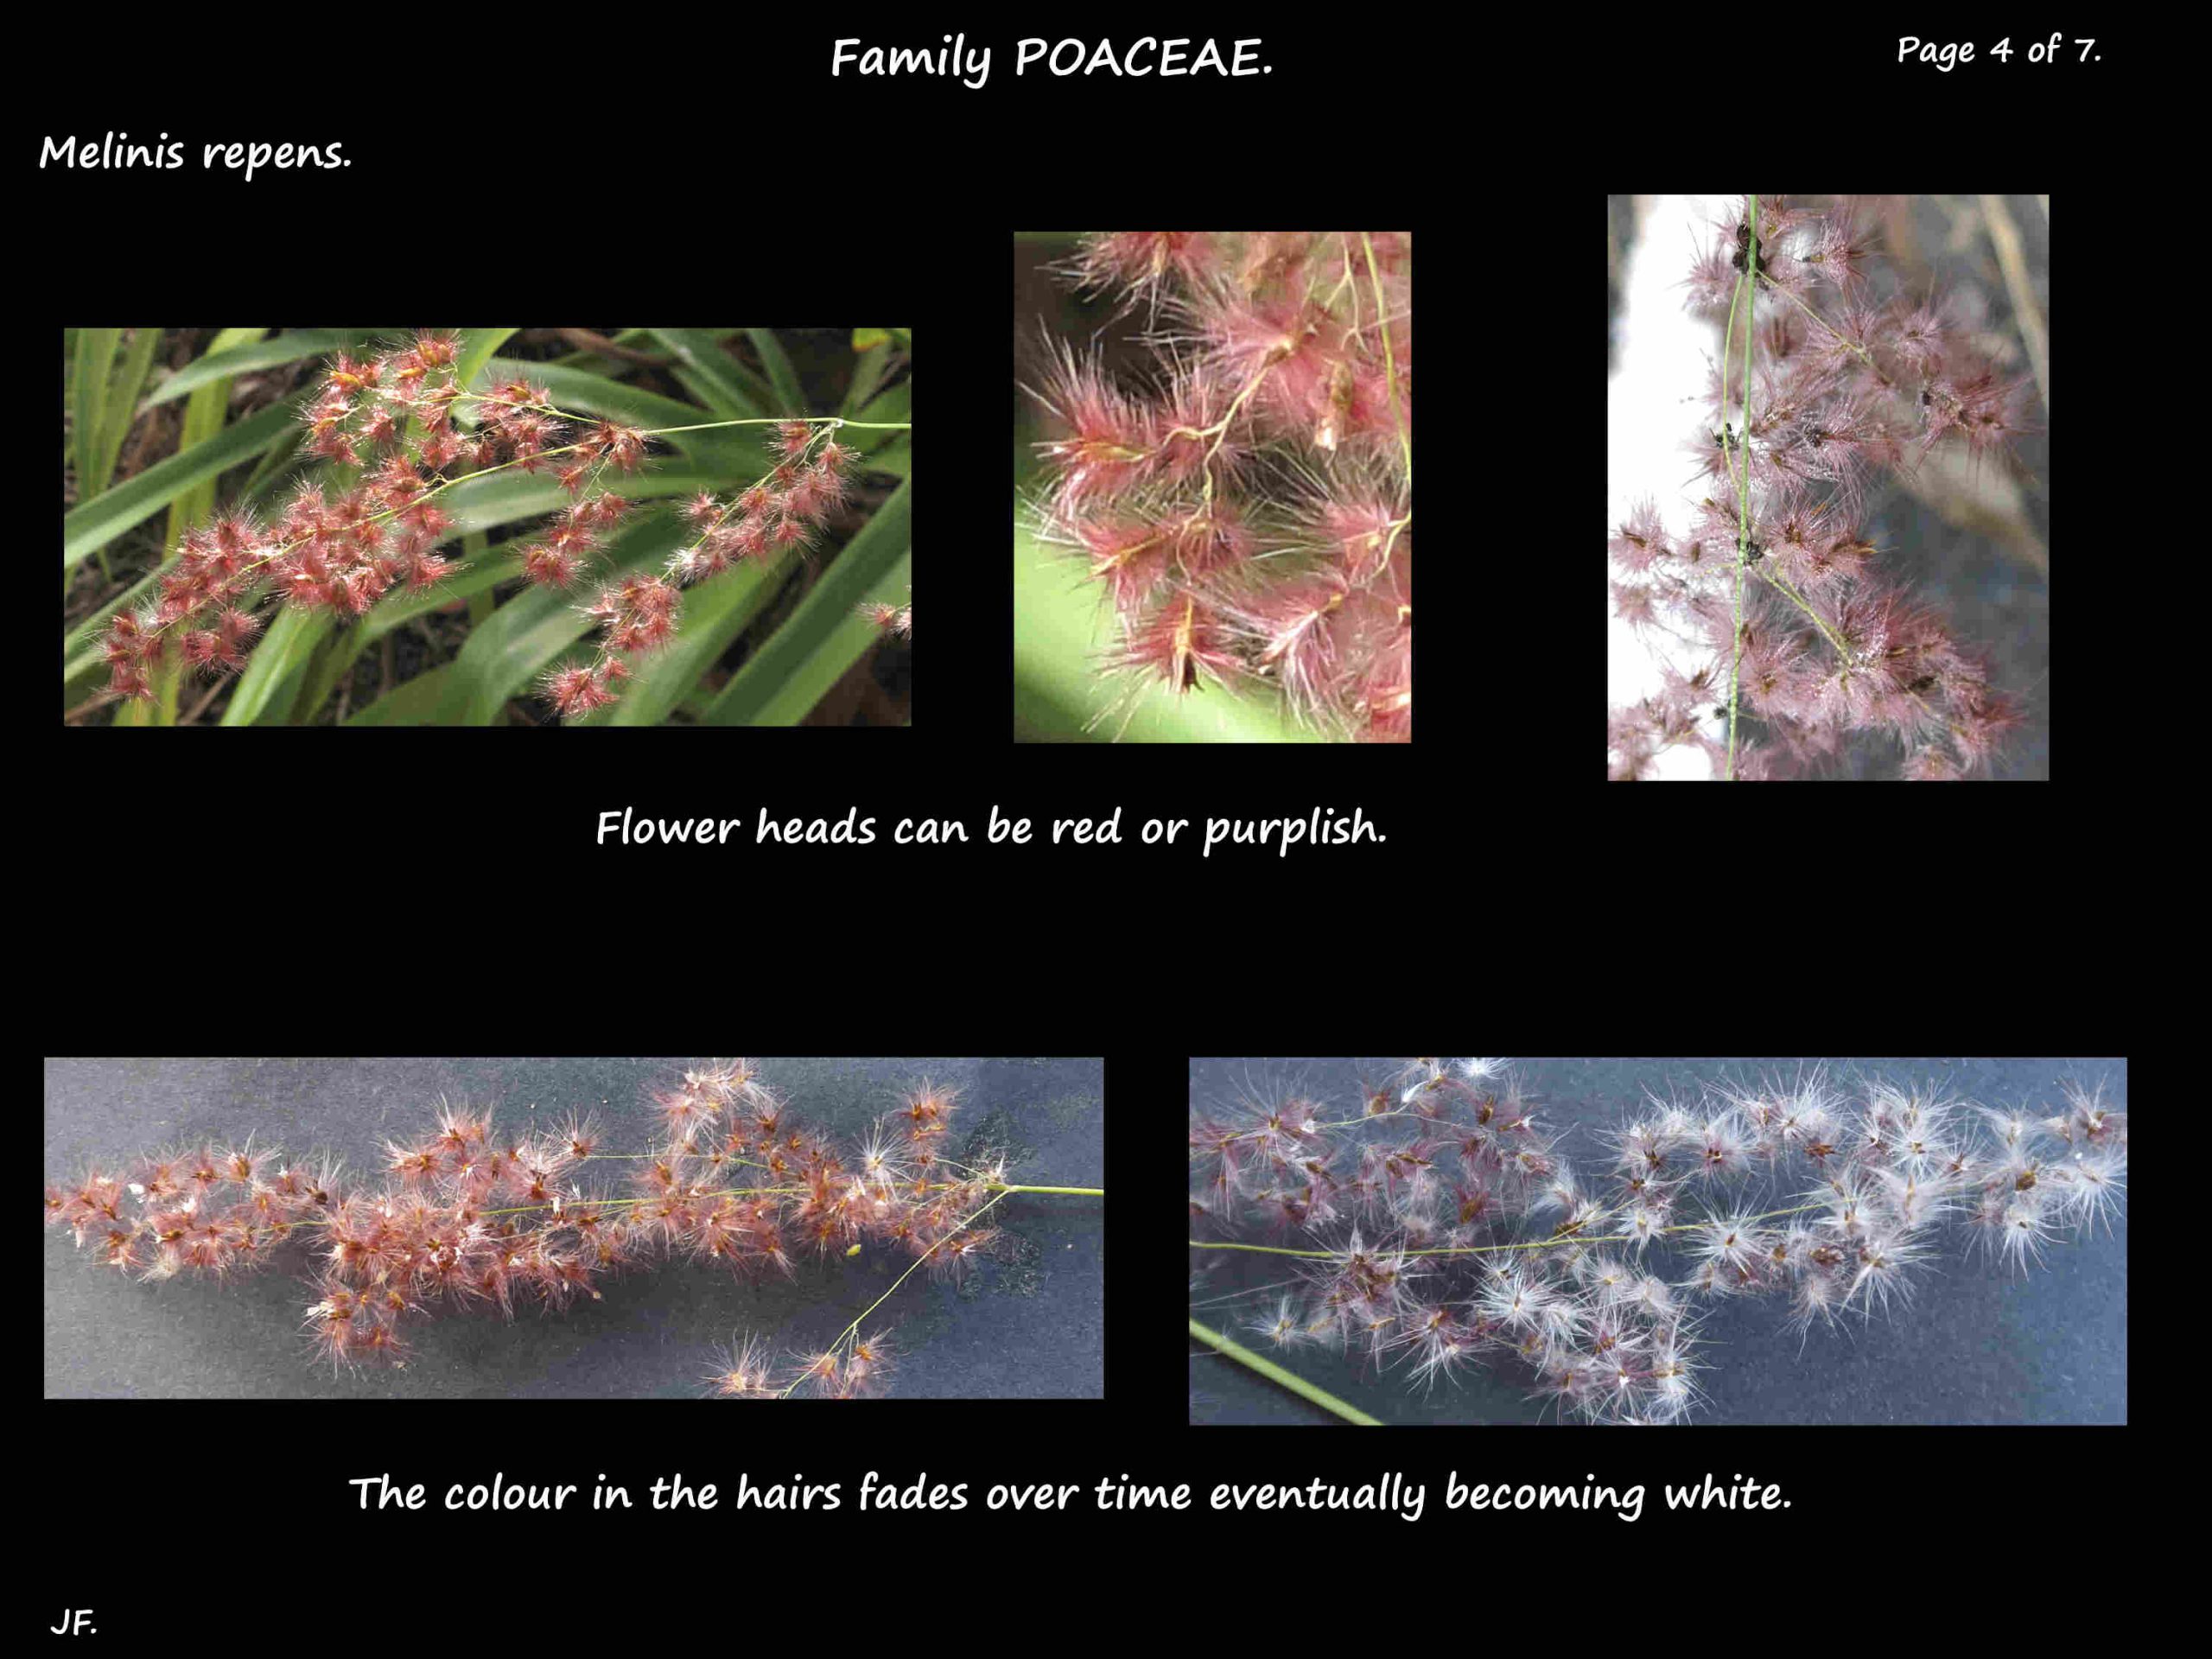 4 Natal grass can have red or purplish flower heads